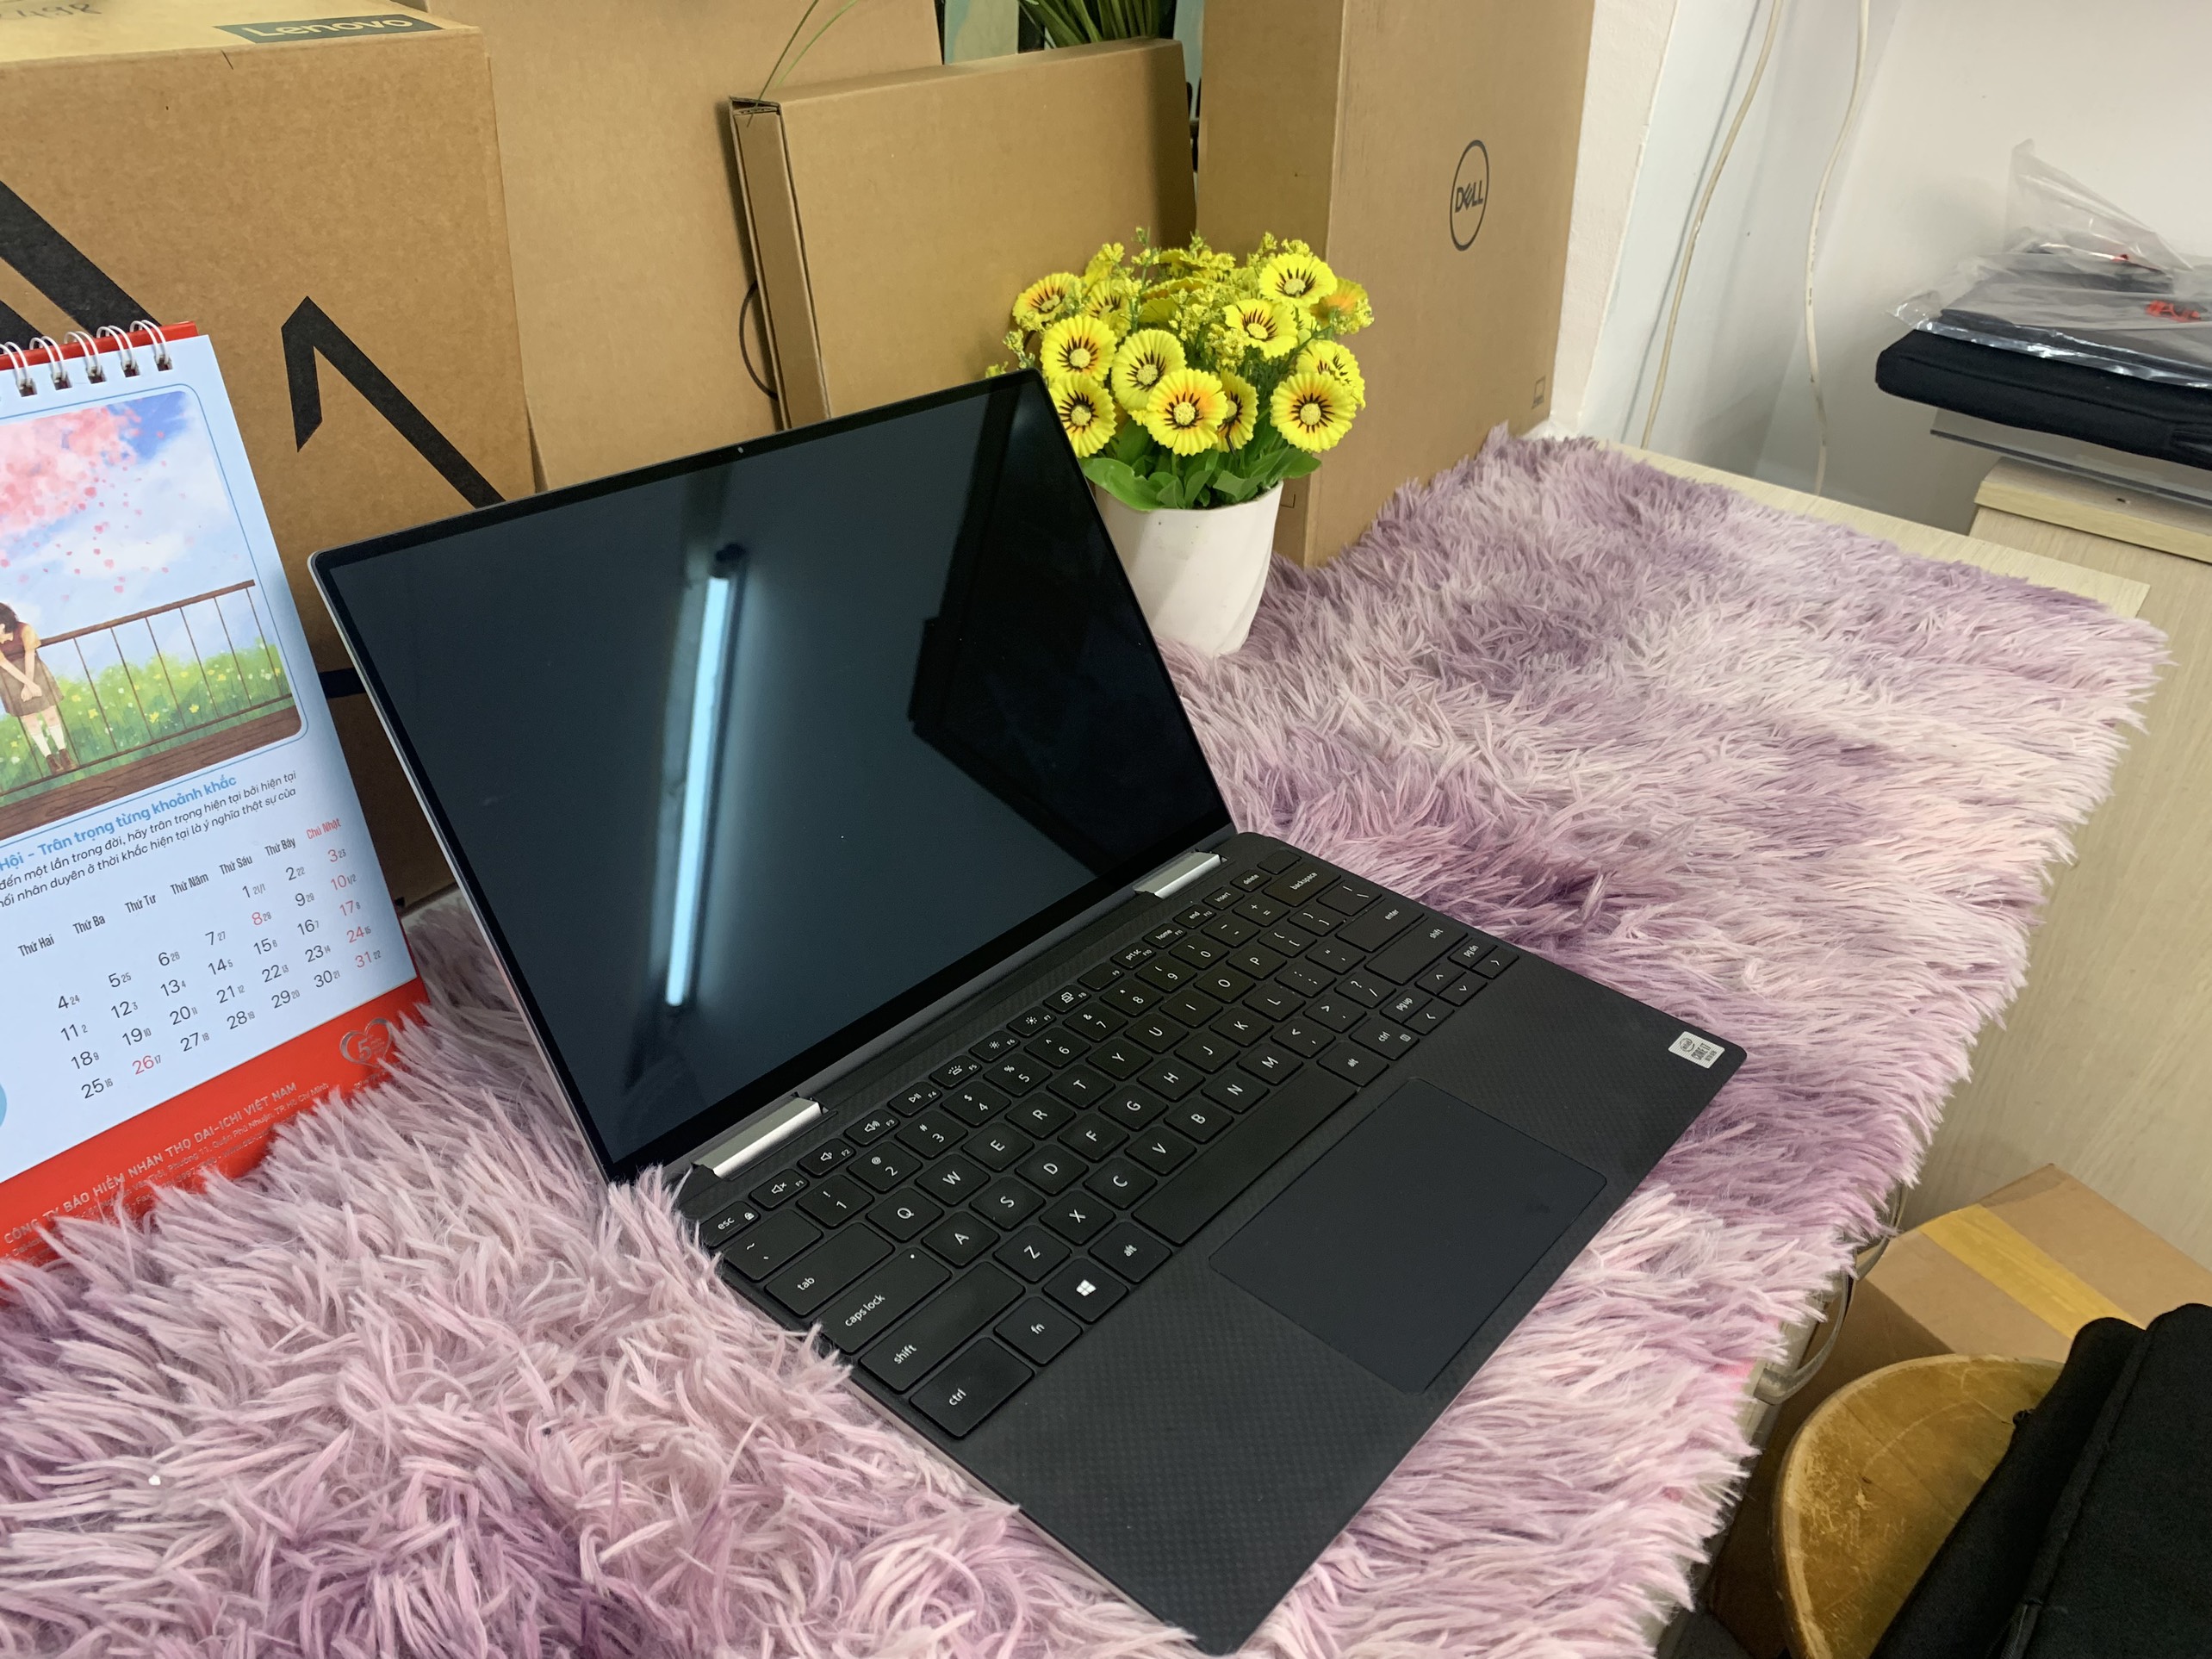 Dell XPS 13 7390 (2 in 1)